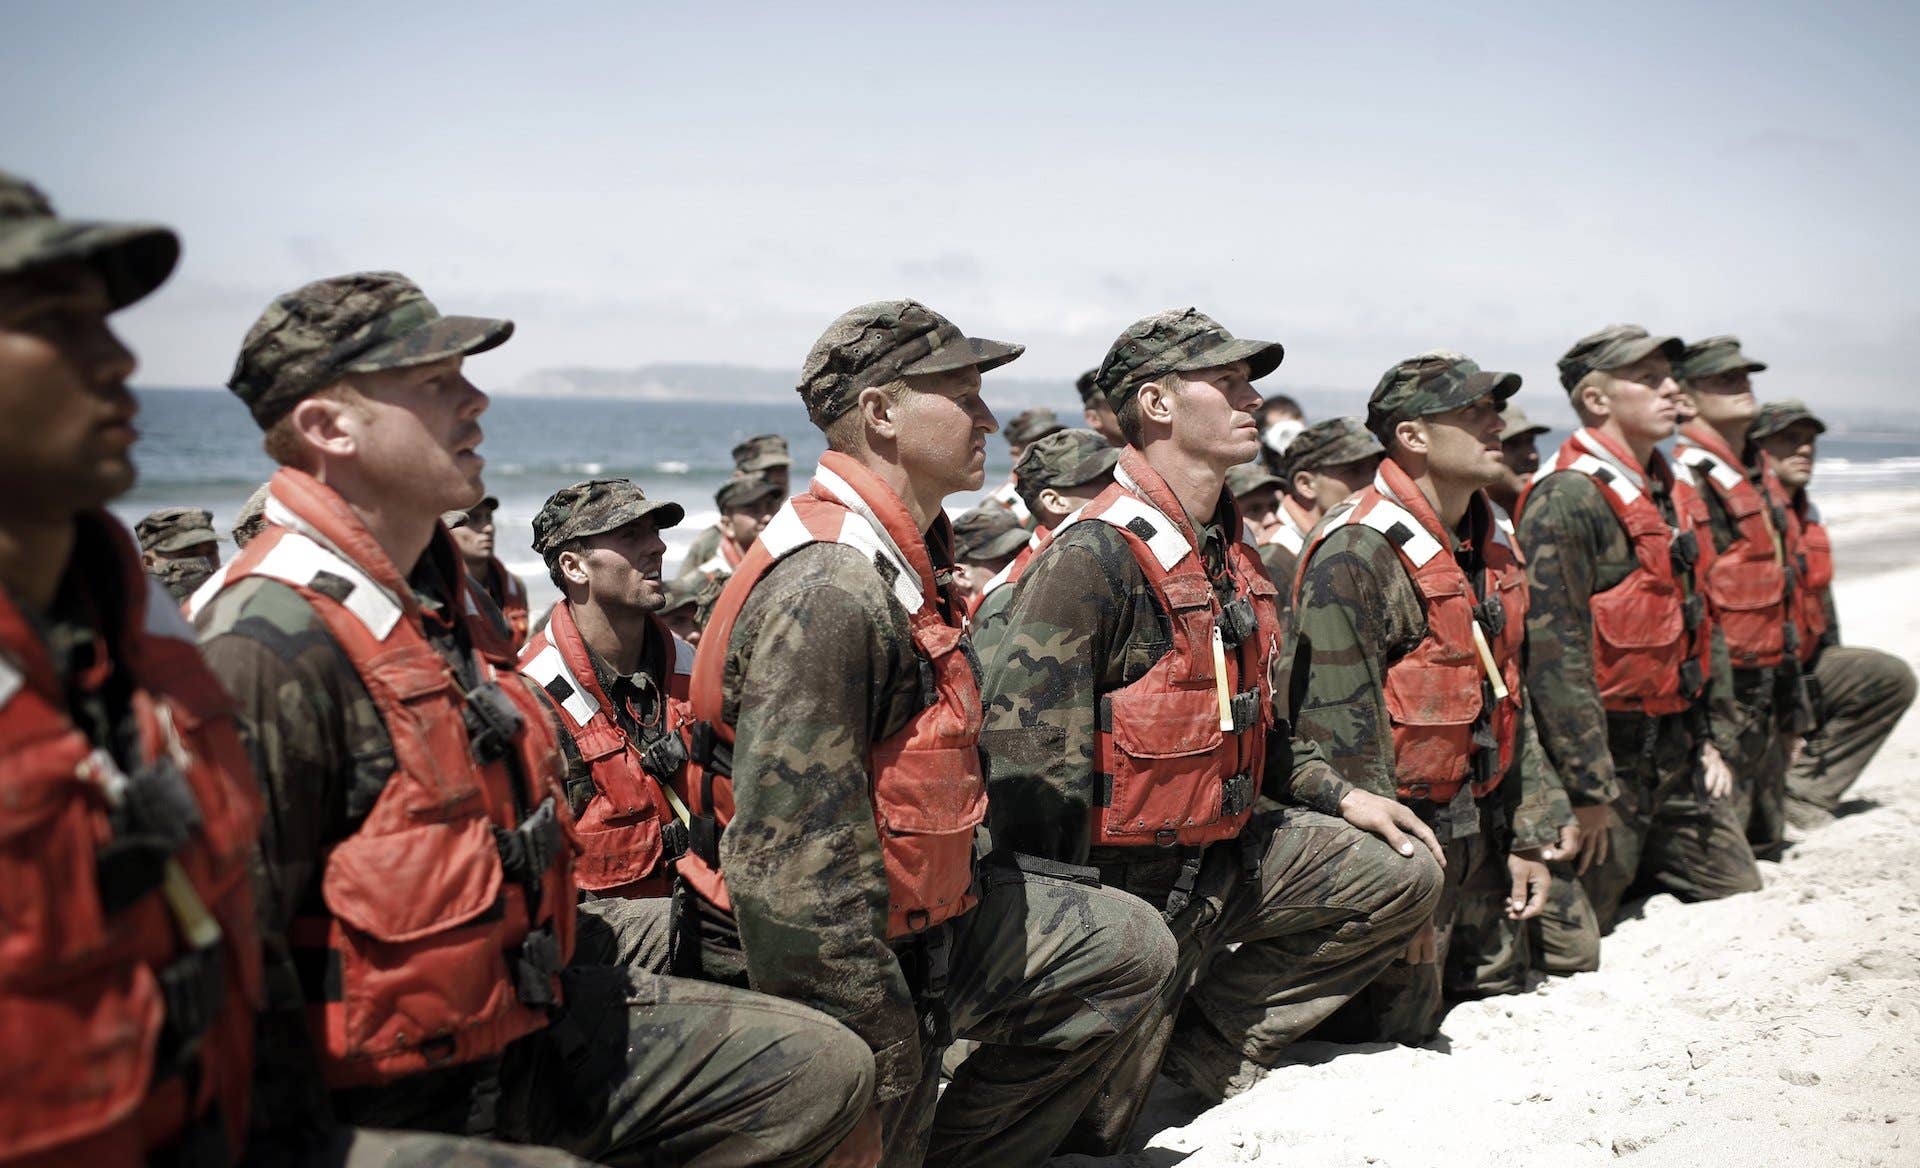 Navy SEAL candidates during a training program in 2010